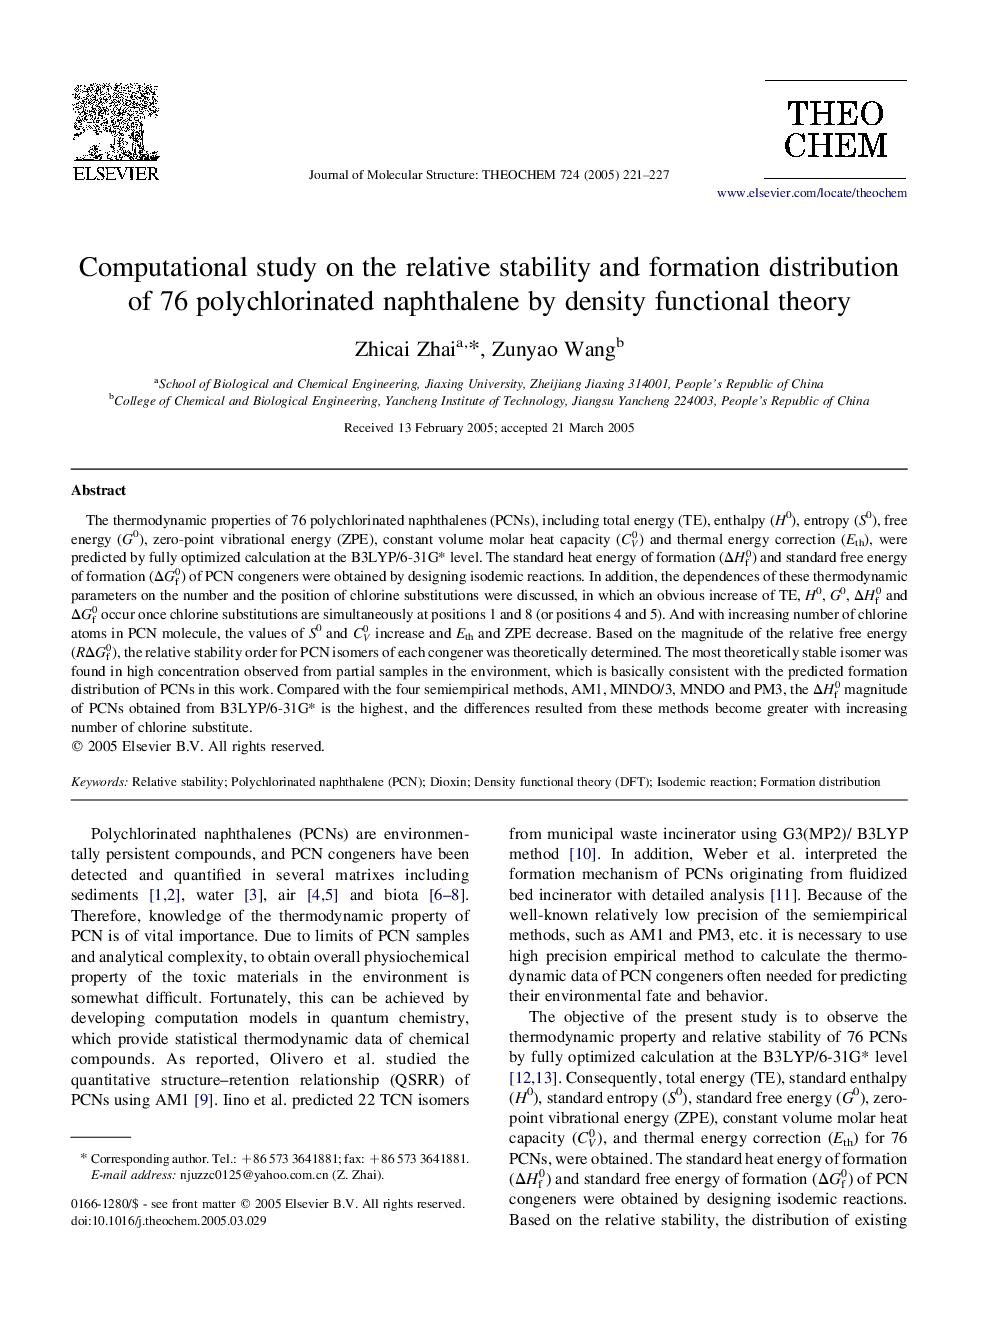 Computational study on the relative stability and formation distribution of 76 polychlorinated naphthalene by density functional theory